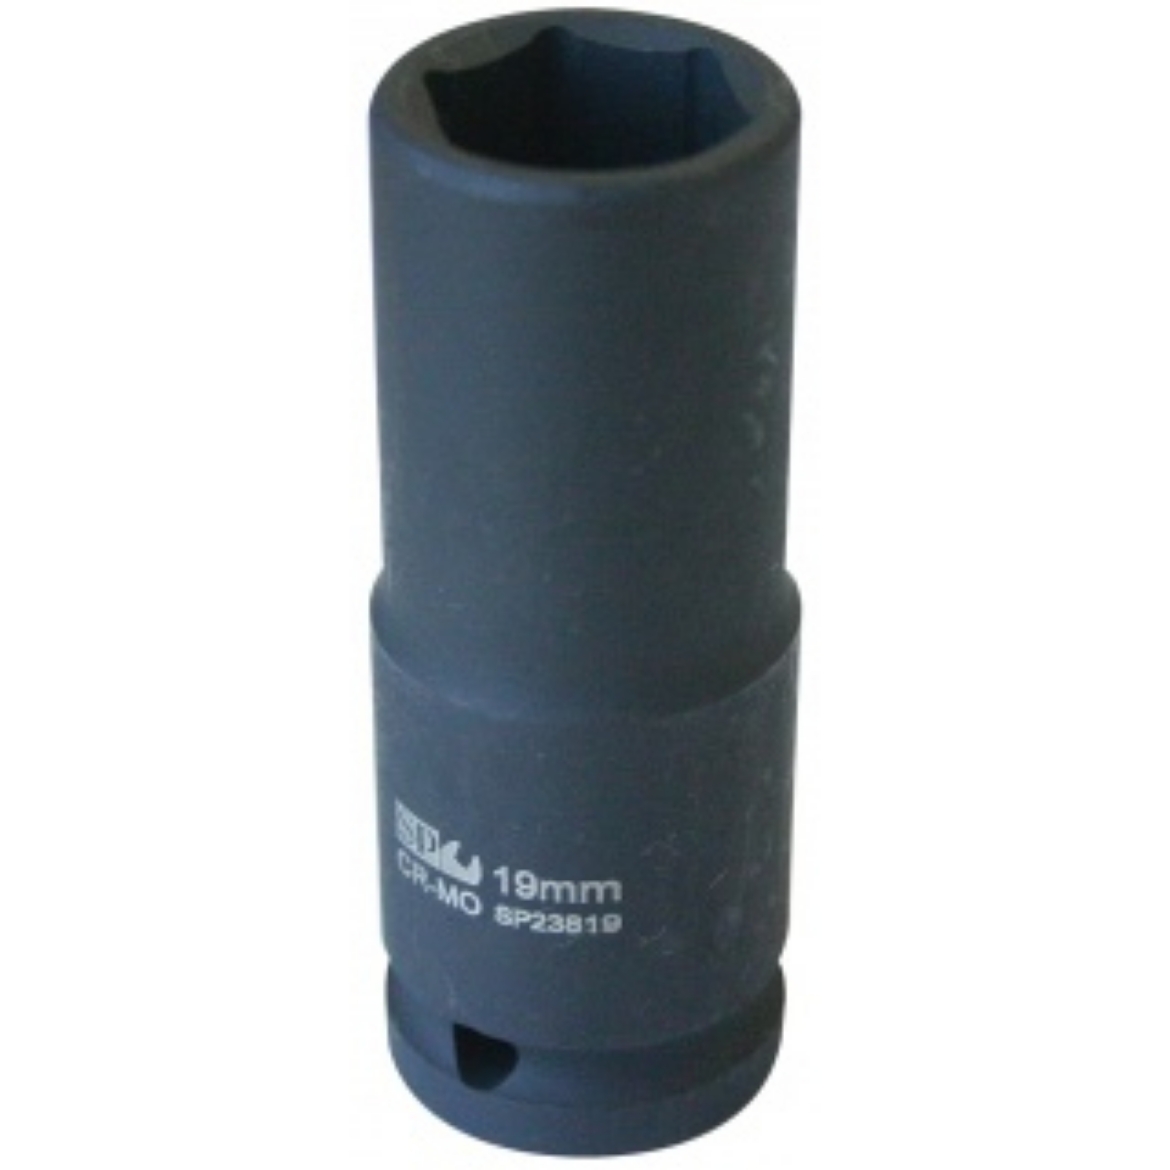 Picture of SOCKET IMPACT 1/2" DR 6PT DEEP METRIC 19MM SP TOOLS